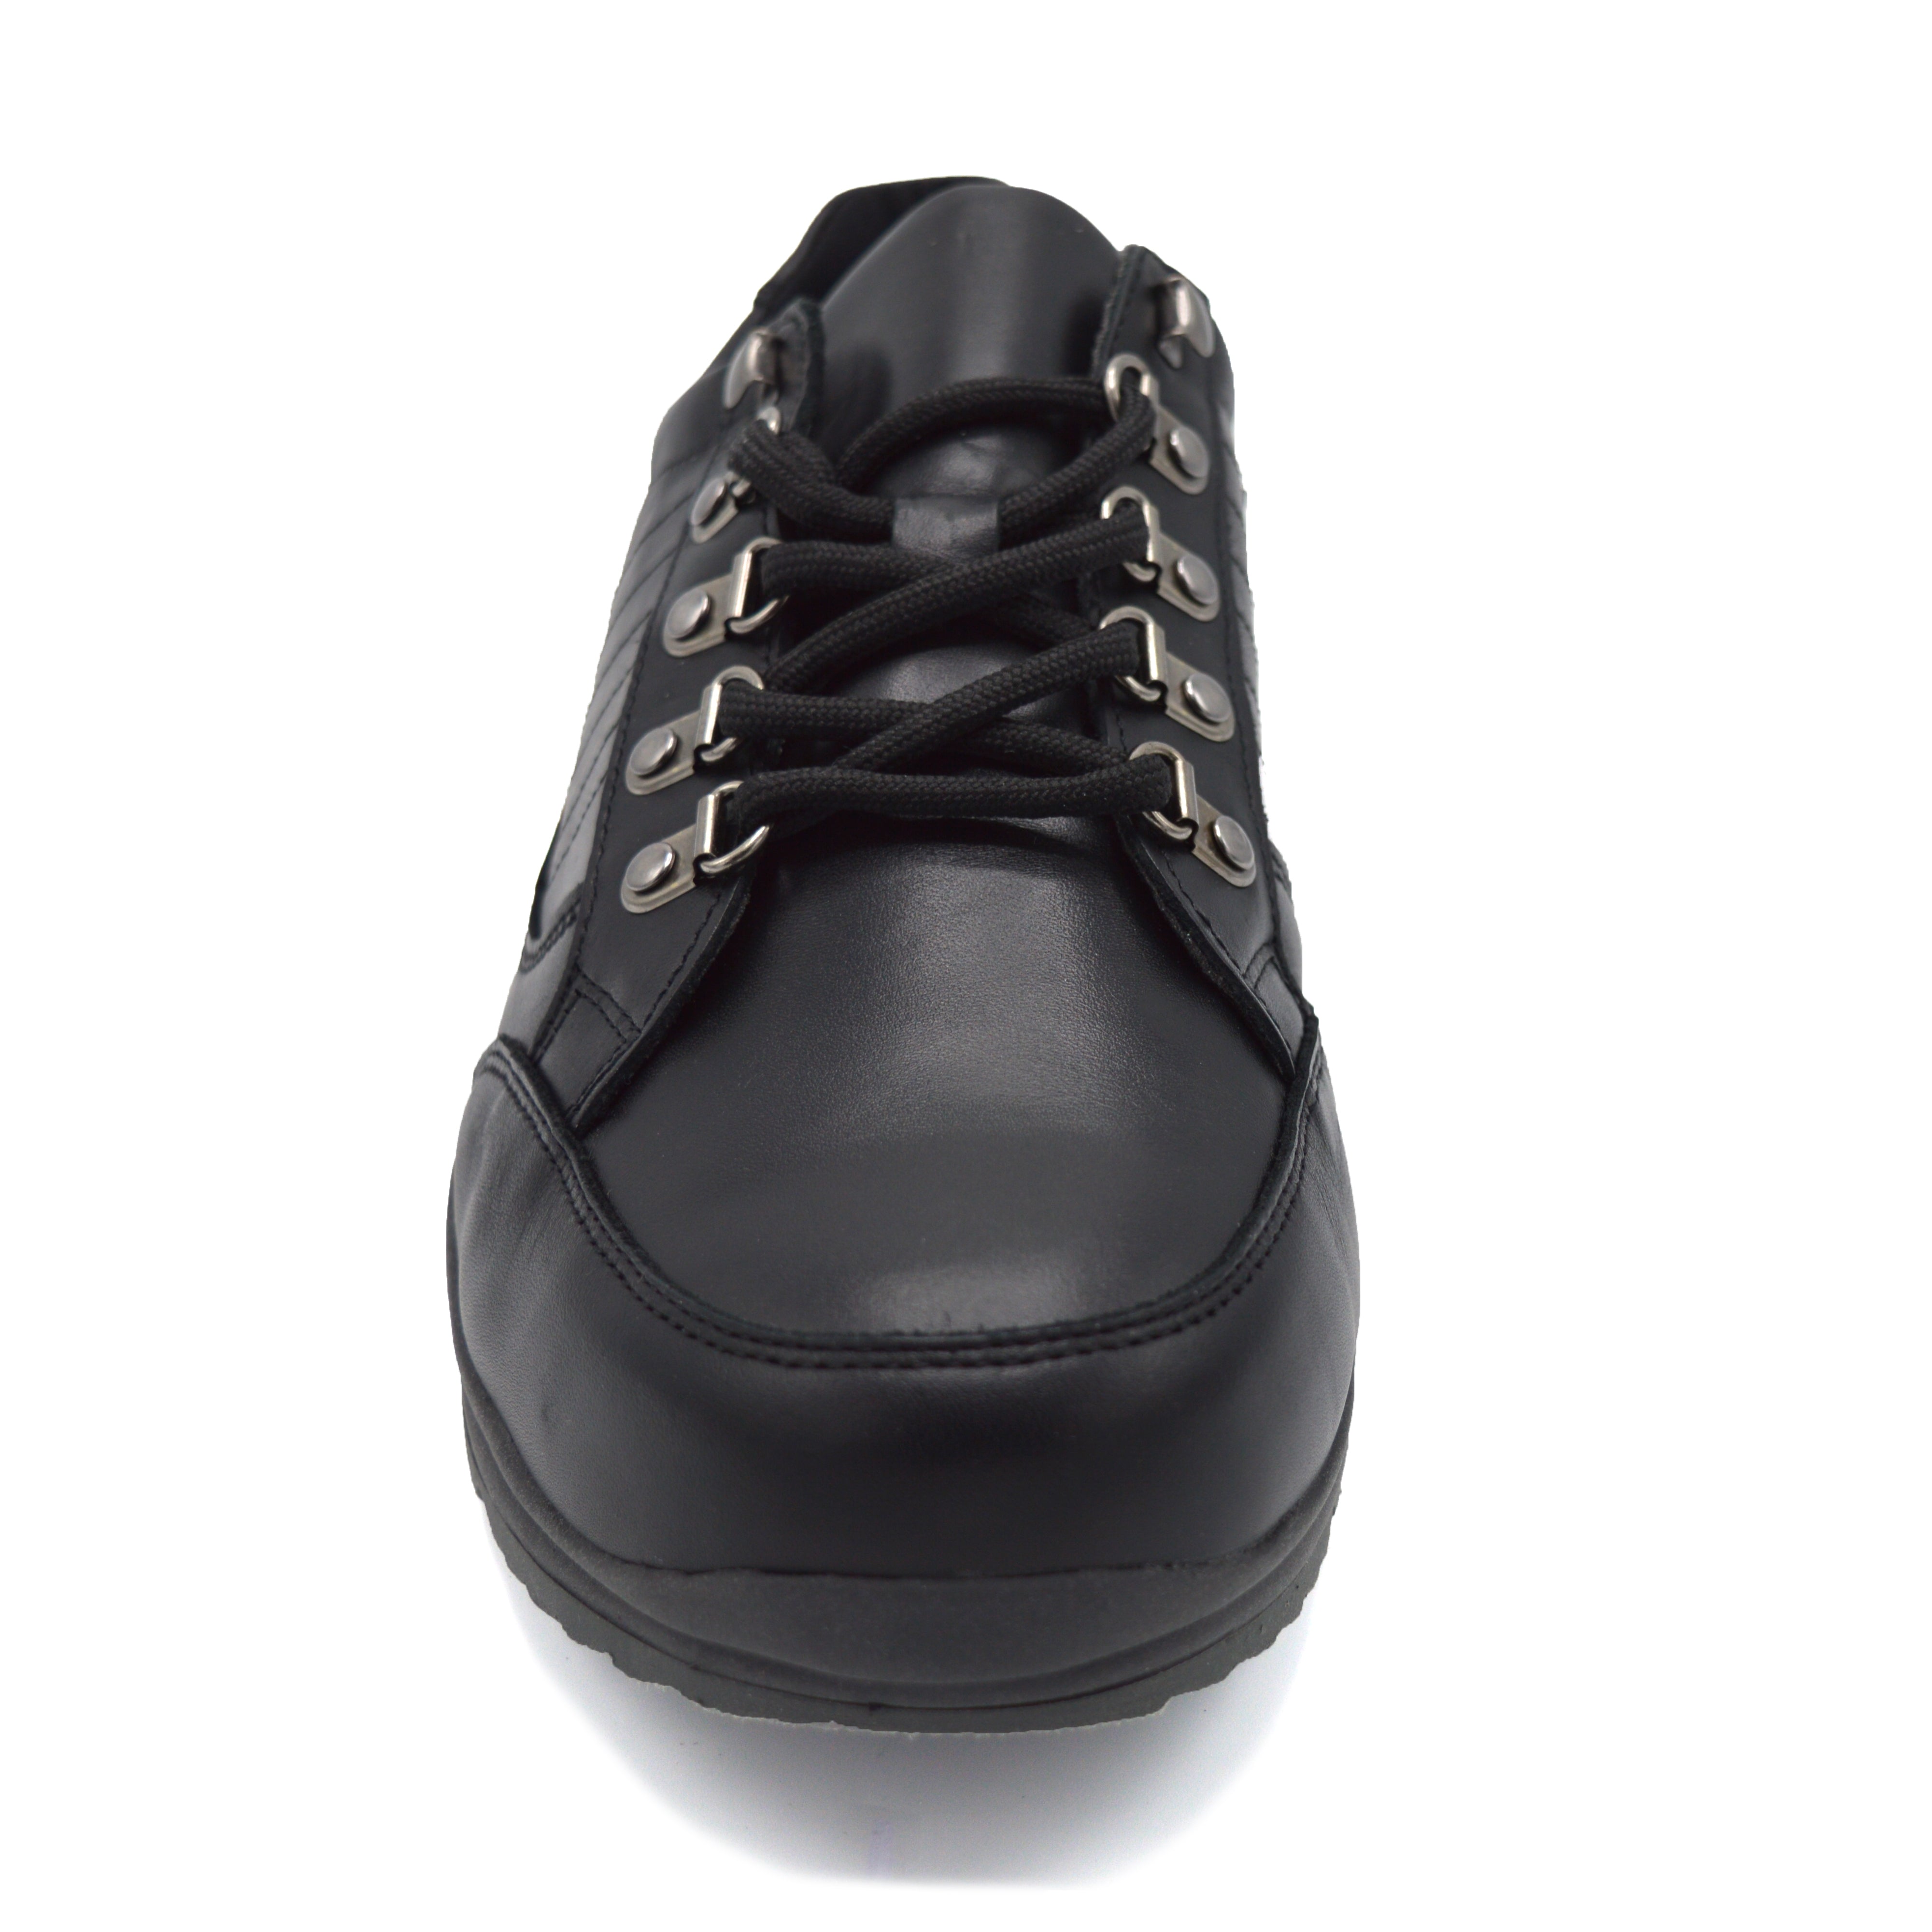 Mens Comfortable Black Trainers For Bunions